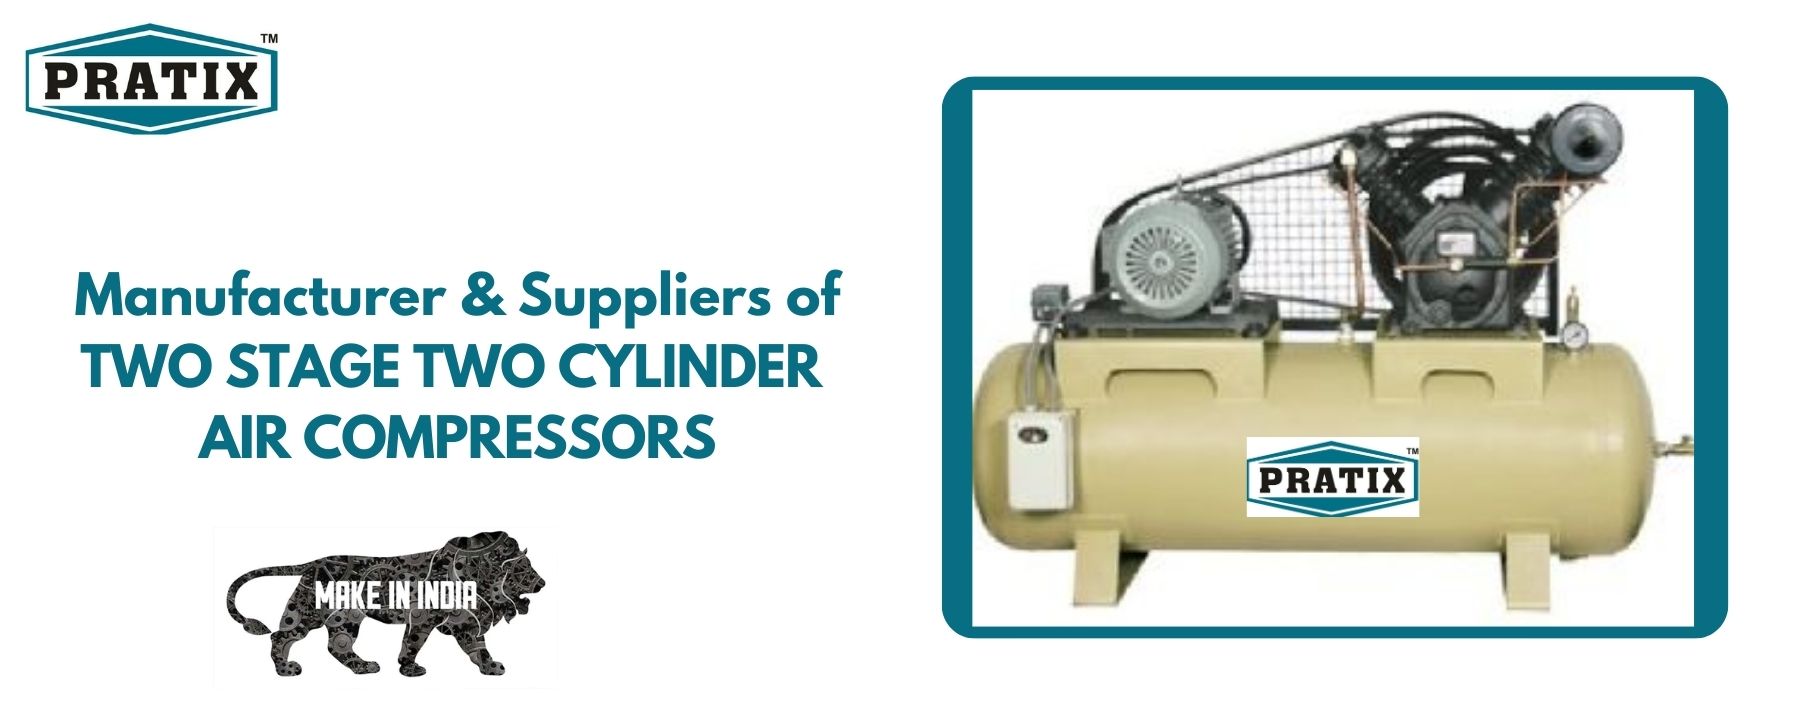 TWO STAGE TWO CYLINDER AIR COMPRESSORS